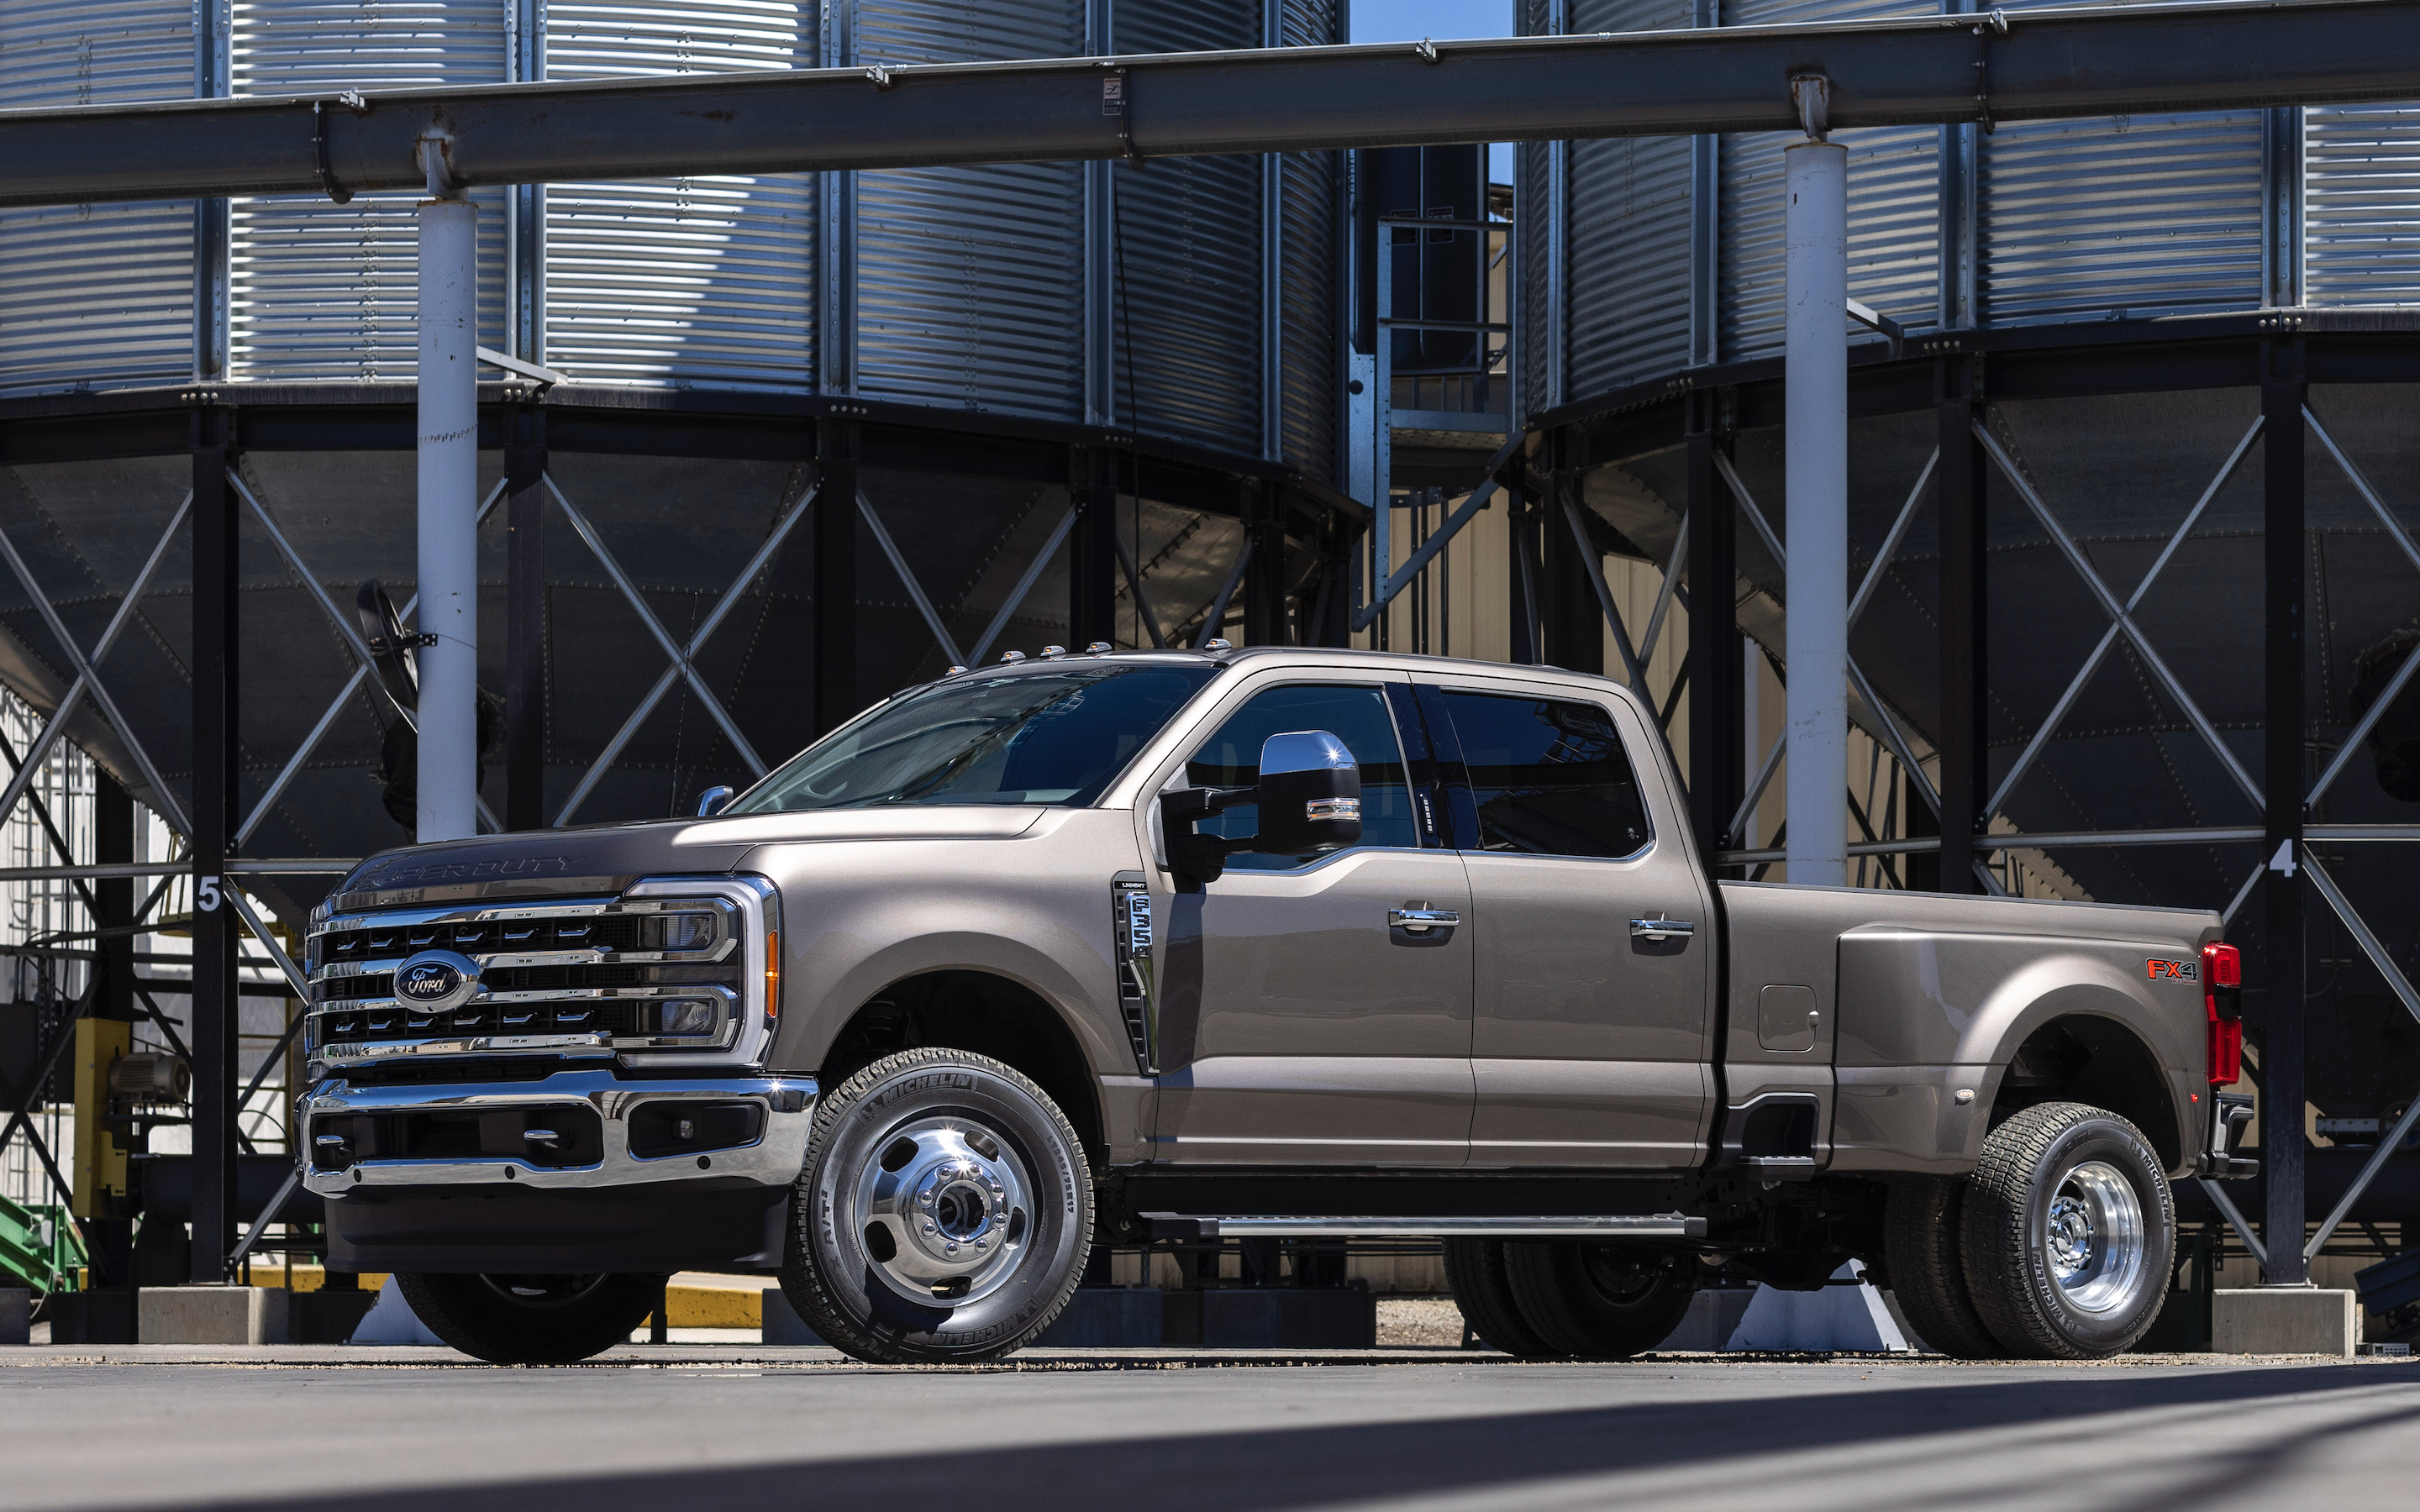 2023 Brown Ford Super Duty F-350 Lariat Showing Off Its Massive Size